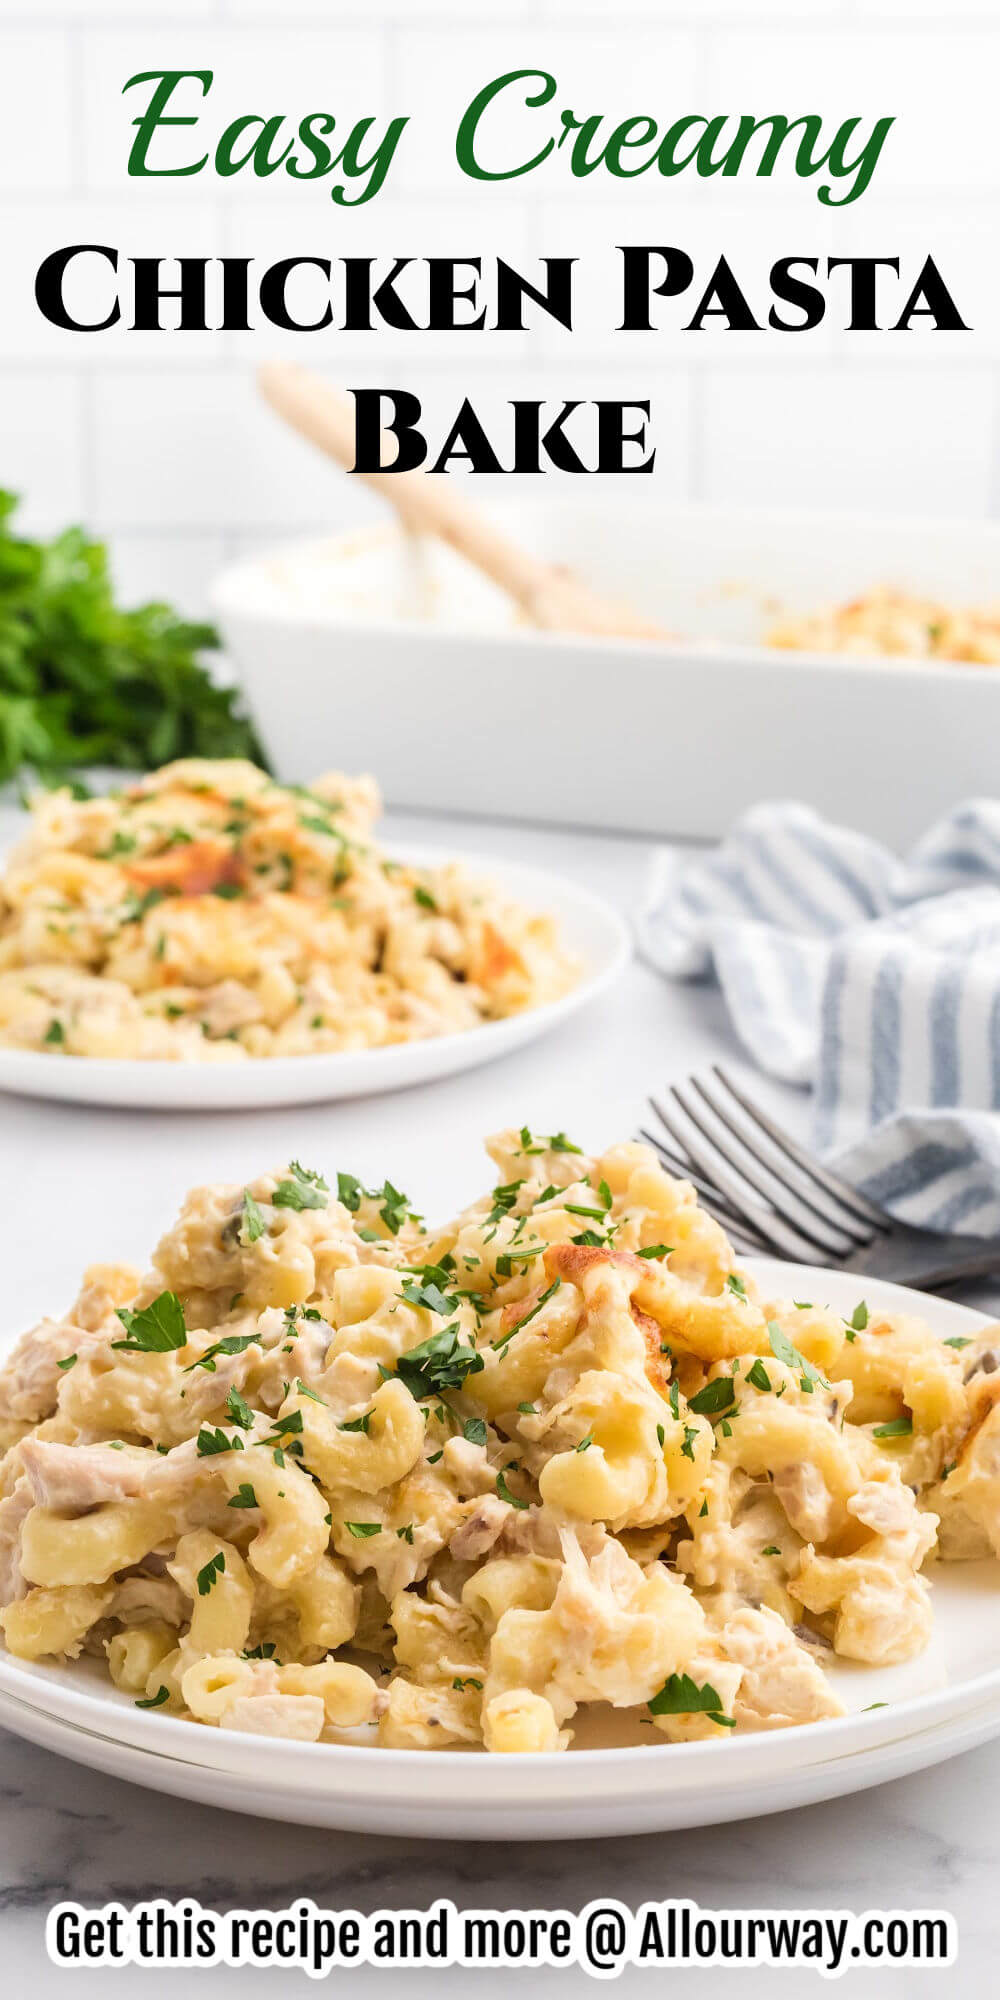 Assemble this Creamy Chicken Pasta Bake in a matter of 15 minutes with creamy sauce, loads of cheese, and juicy rotisserie chicken. It’s a comforting main meal for dinner or to take to your next potluck. 